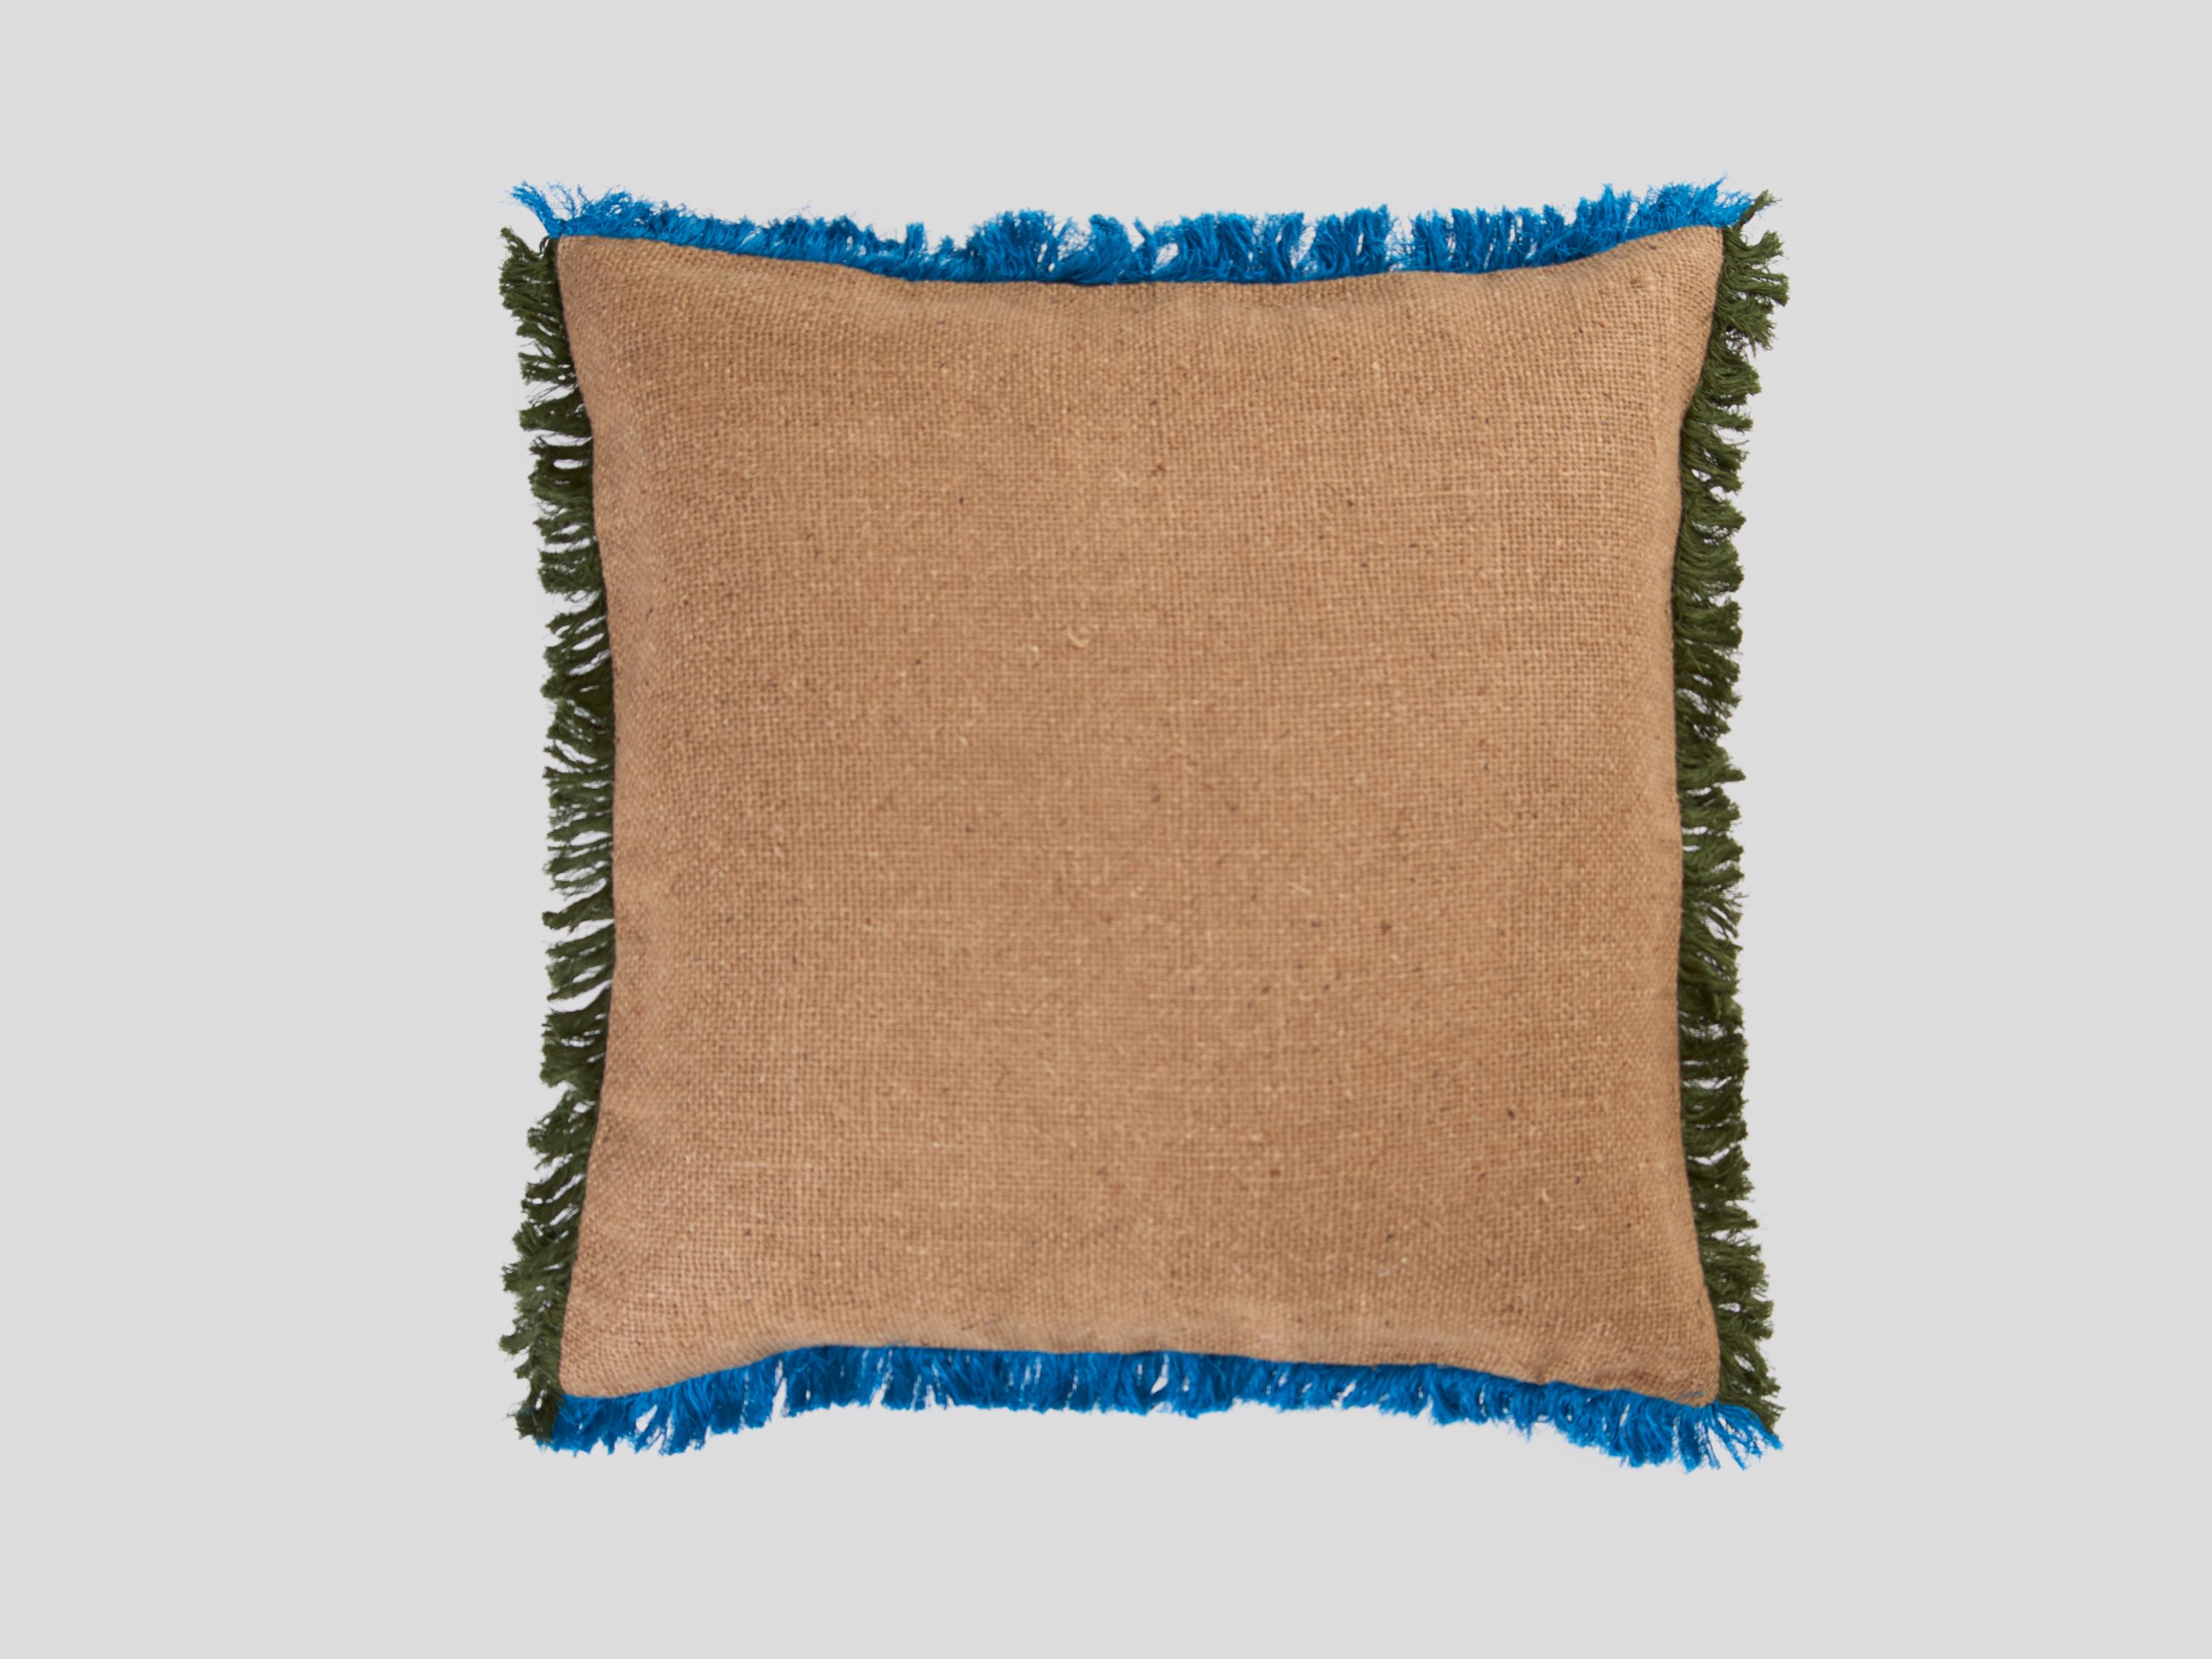 Dutch Widcombe, Hand Embroidered Cushion by Jupe by Jackie